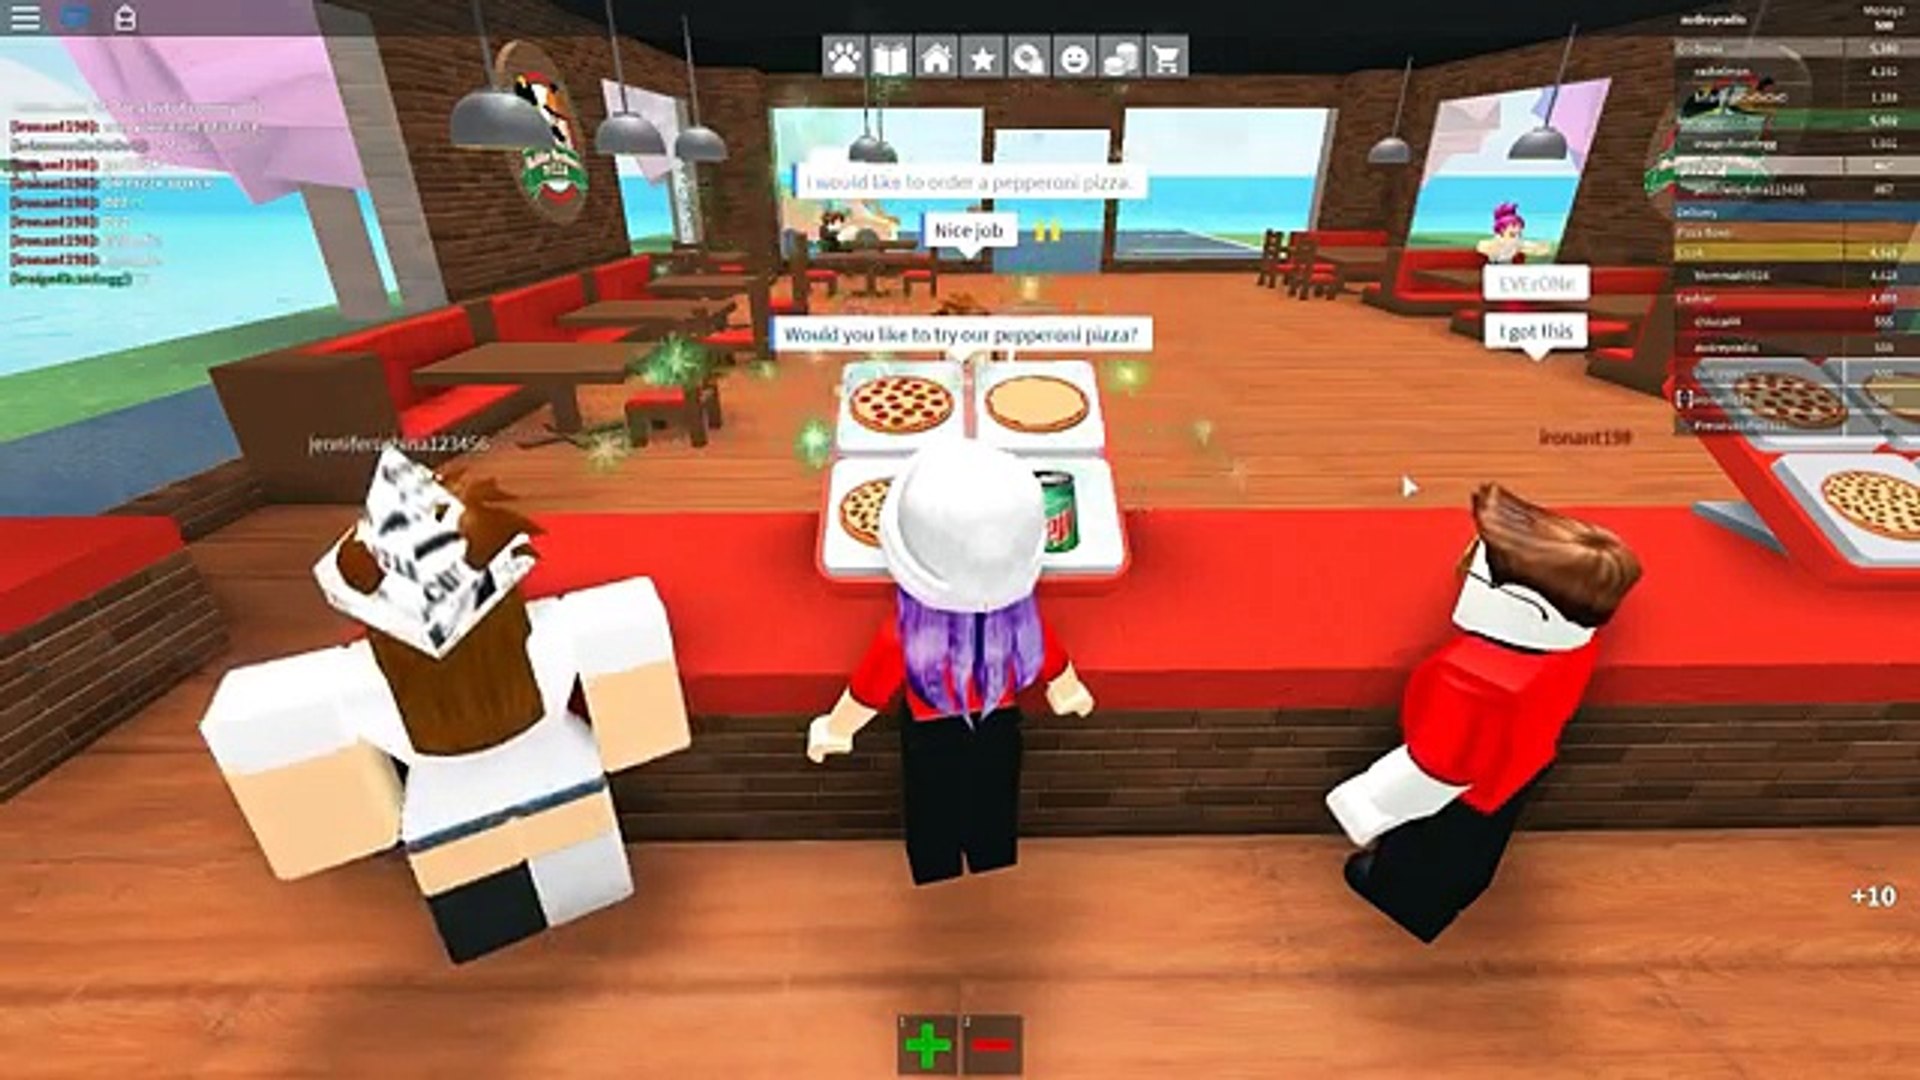 Roblox Work At A Pizza Place Roleplay Radiojh Games Video Dailymotion - games roblox rokadia rp